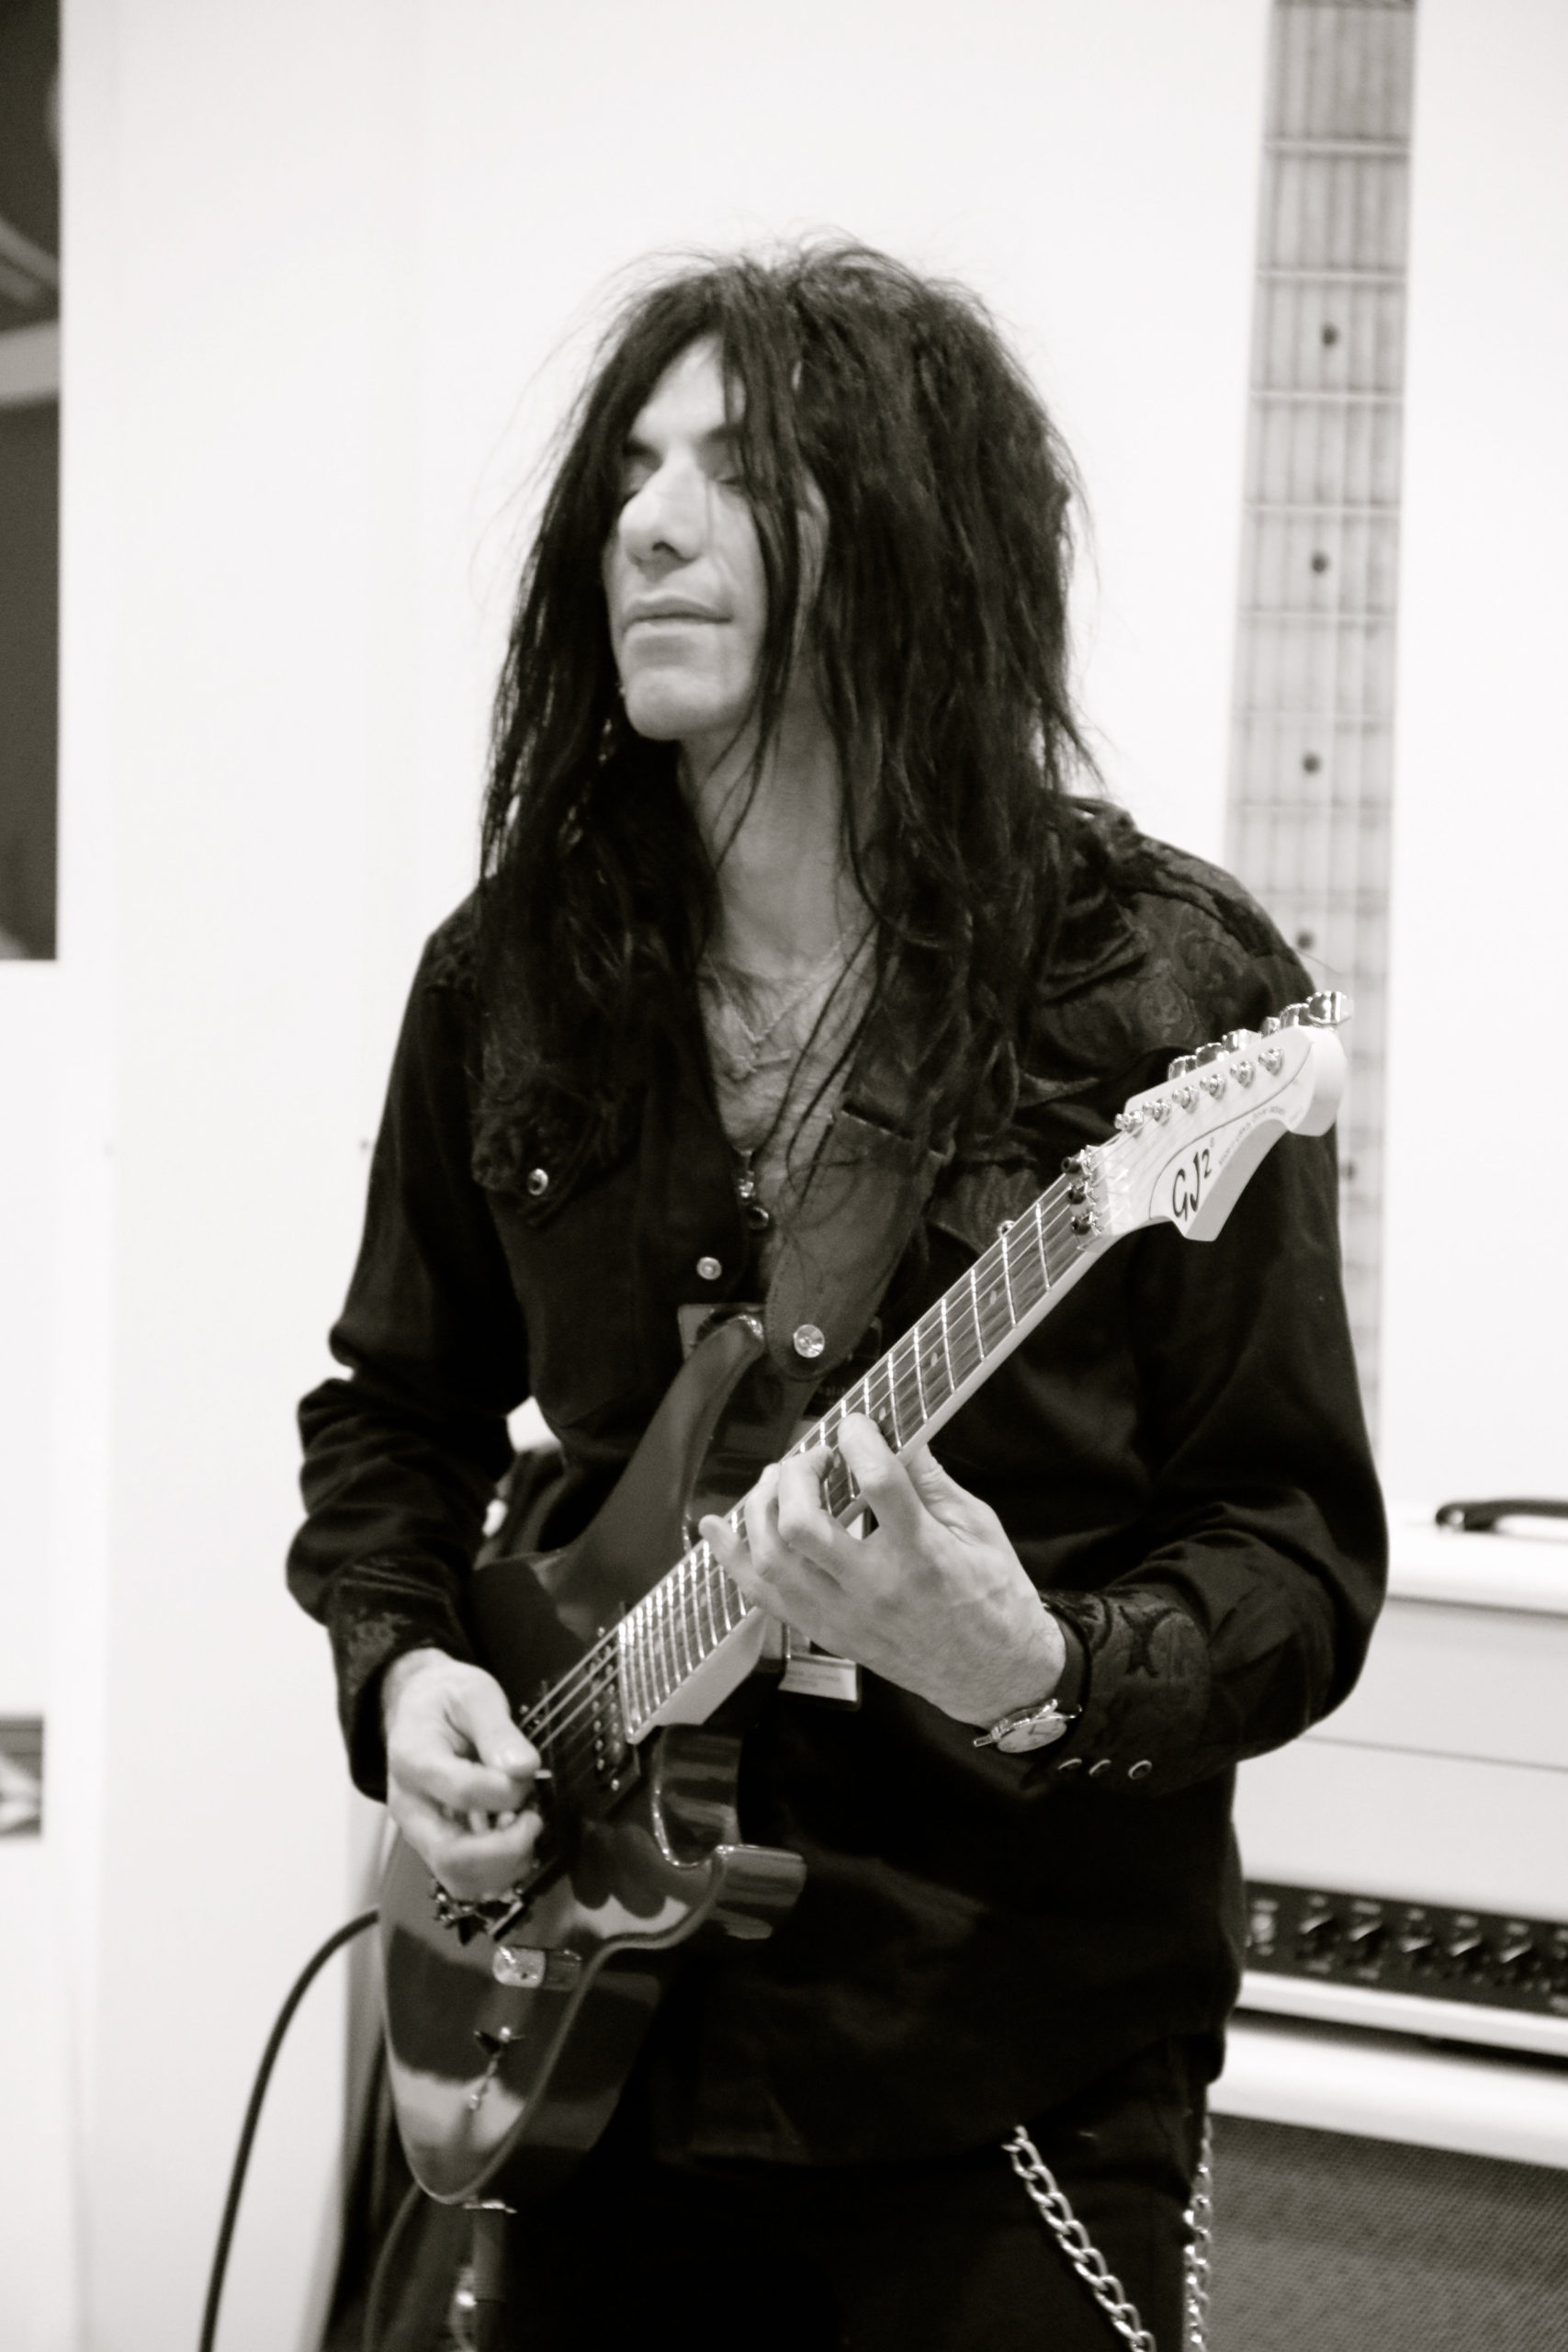 Mike Campese - NAMM 2014 - Photo by Terry Bert.